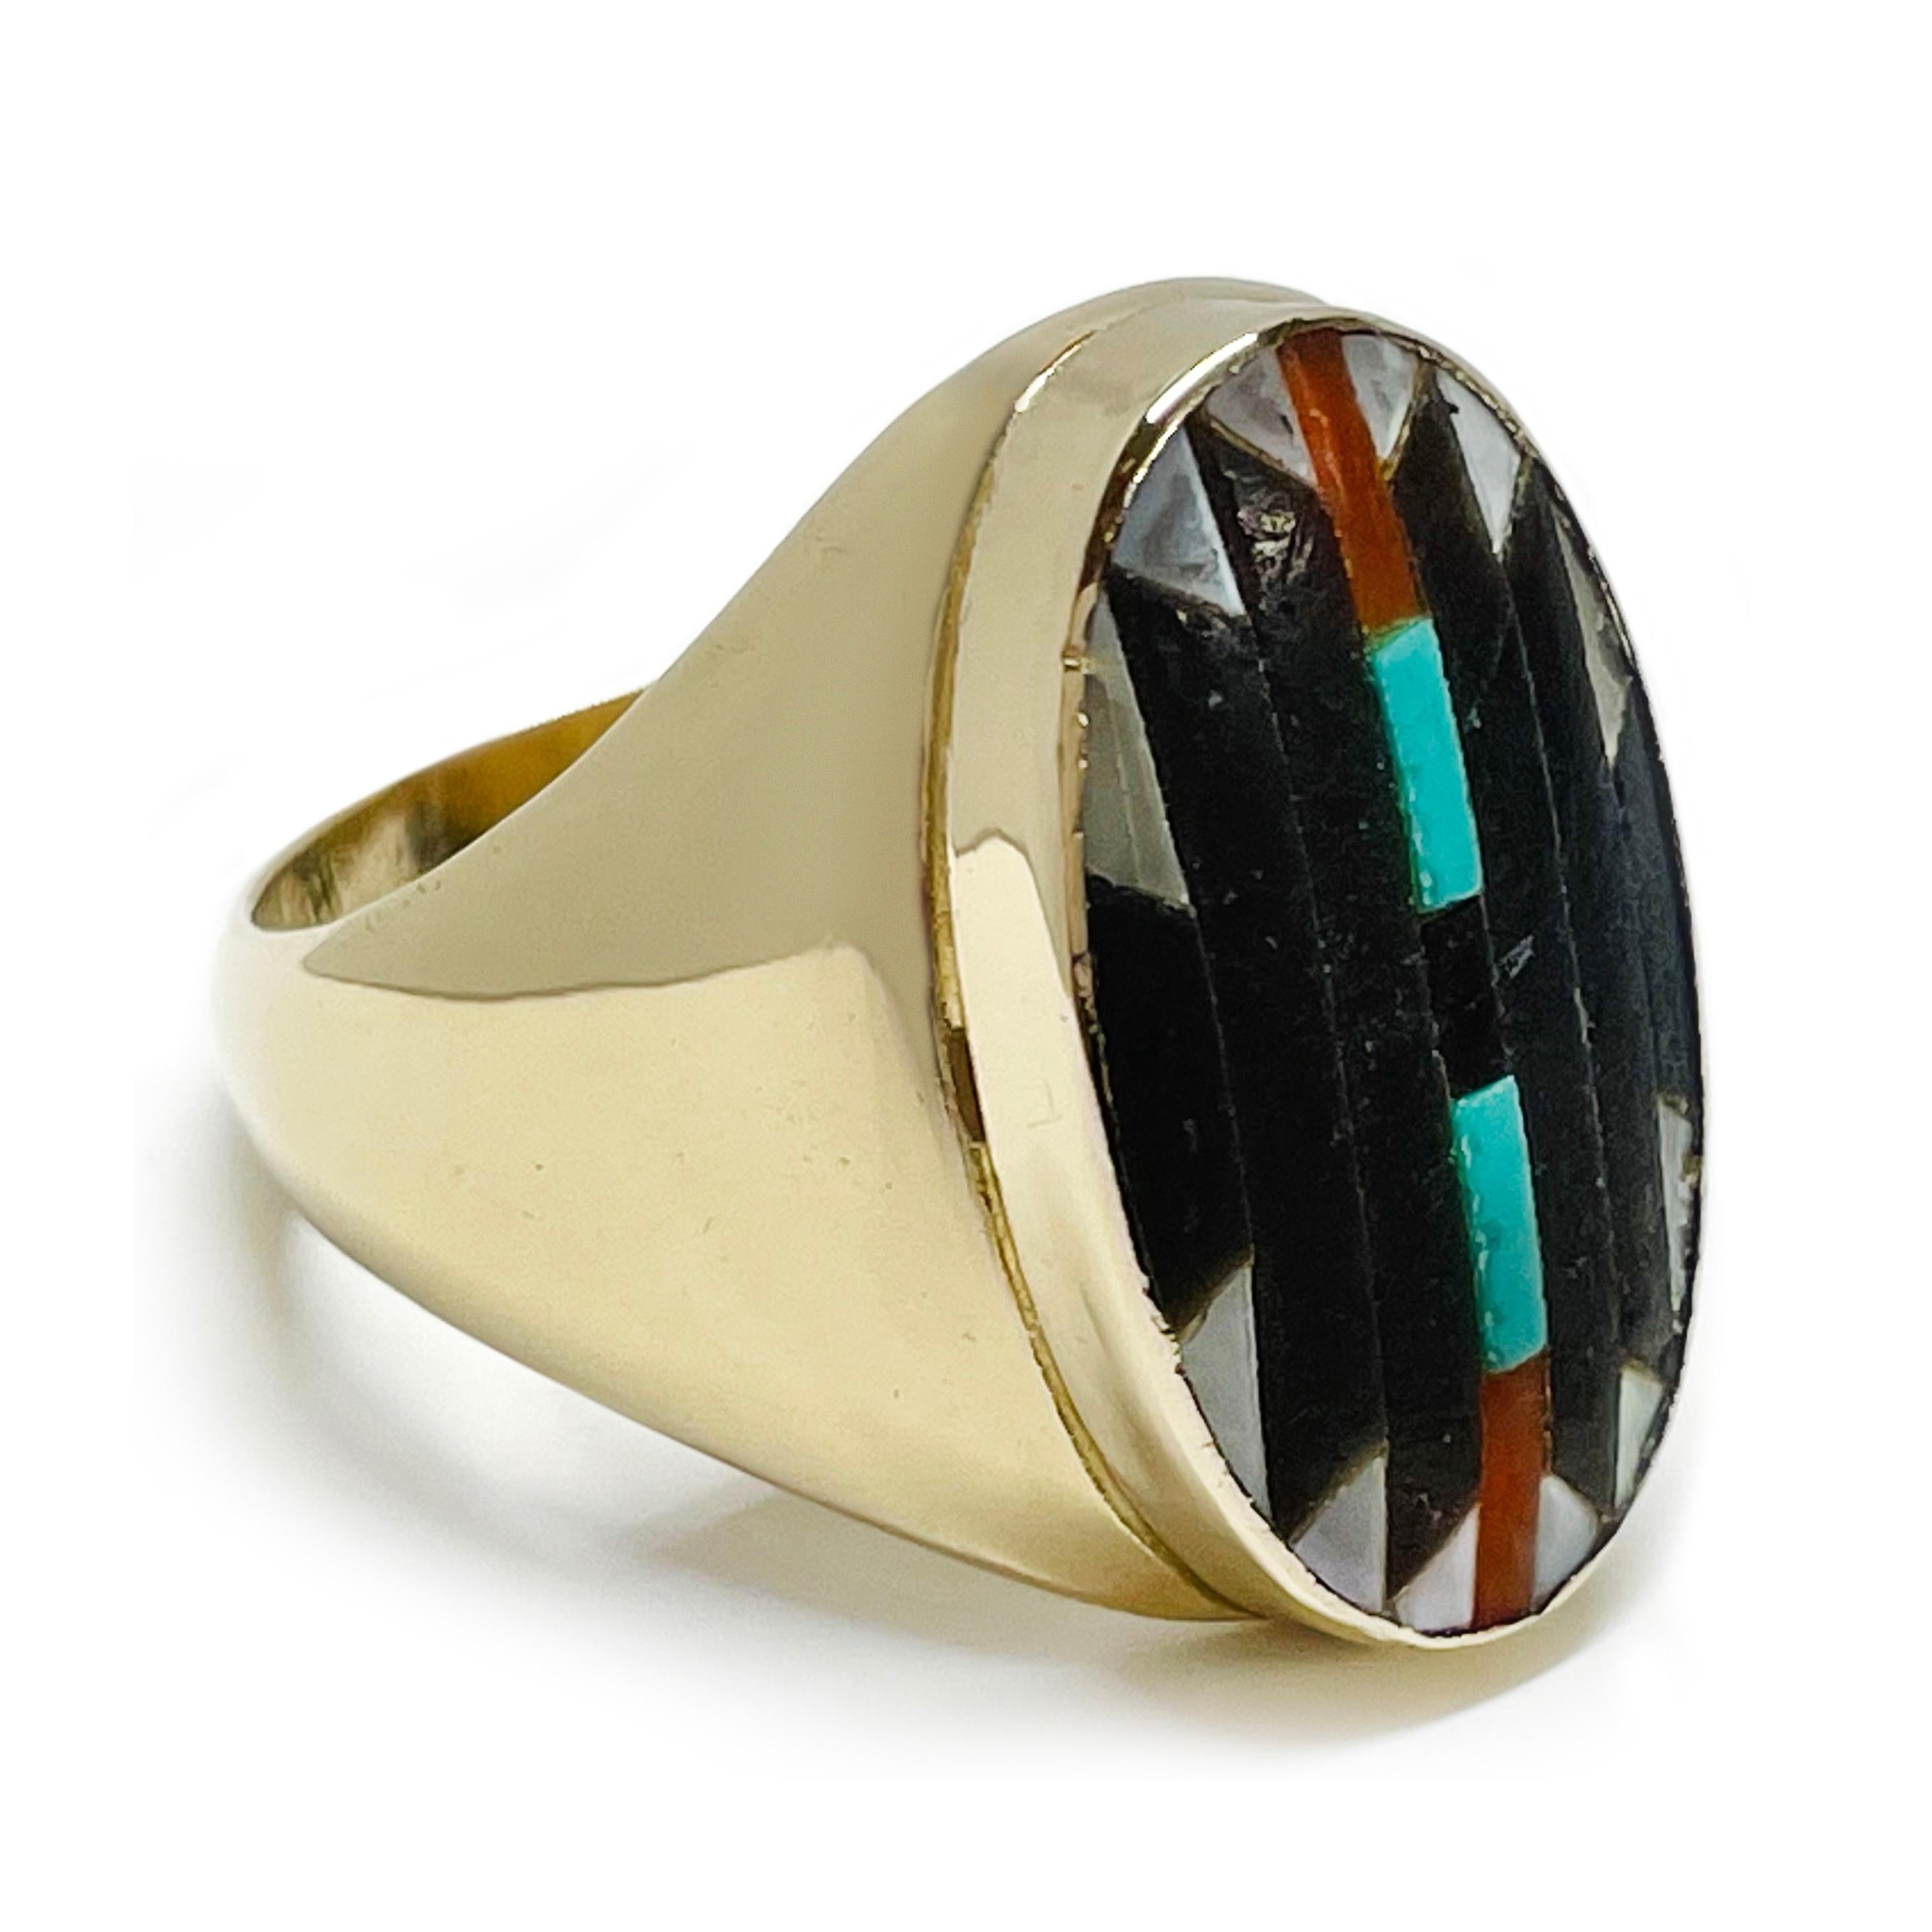 14 Karat Native American Ring. The ring features Onyx, Turquoise, Carnelian, and Mother of Pearl inlay in mosaic pattern. The wide band tapers and the finish is a smooth shiny gold all around. The ring size is 10 1/2. Stamped inside the band are the